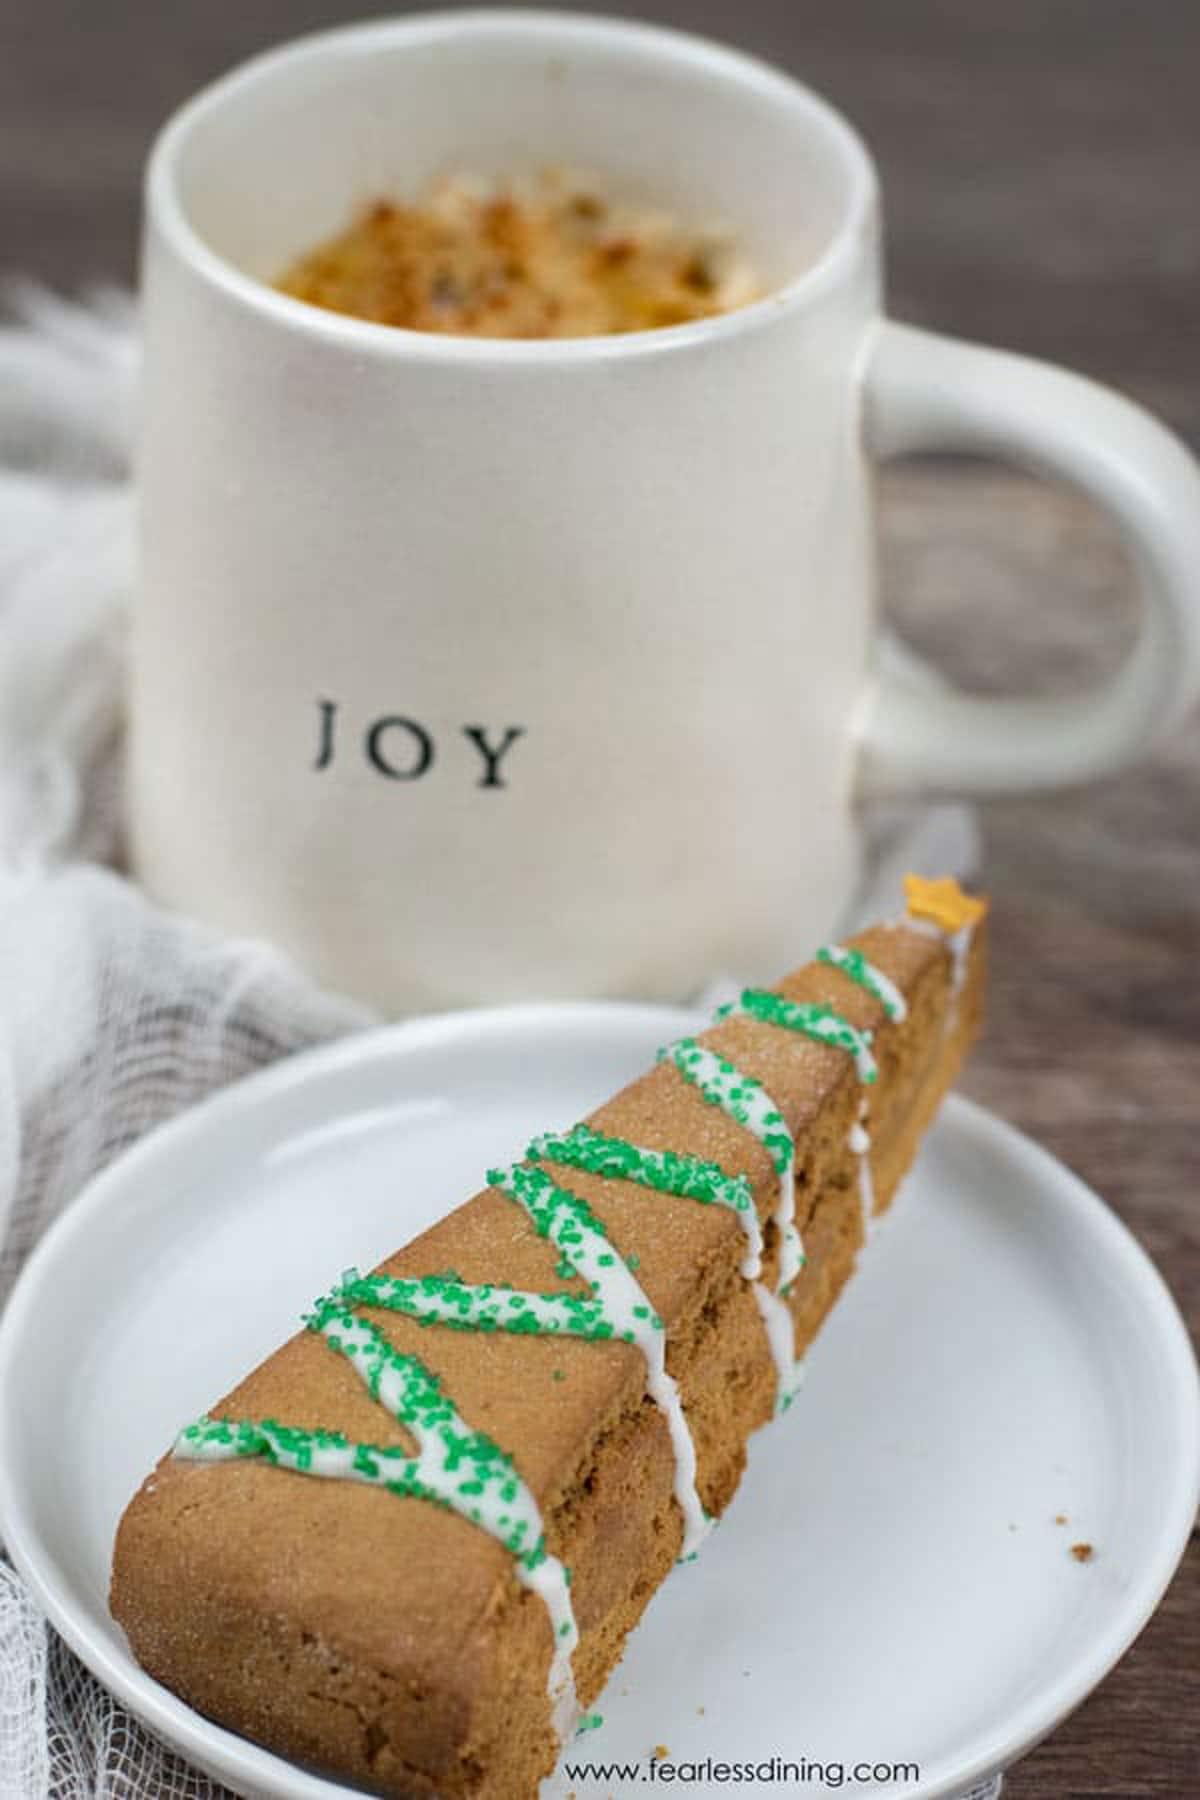 A gingerbread biscotti on a plate next to a mug of coffee.